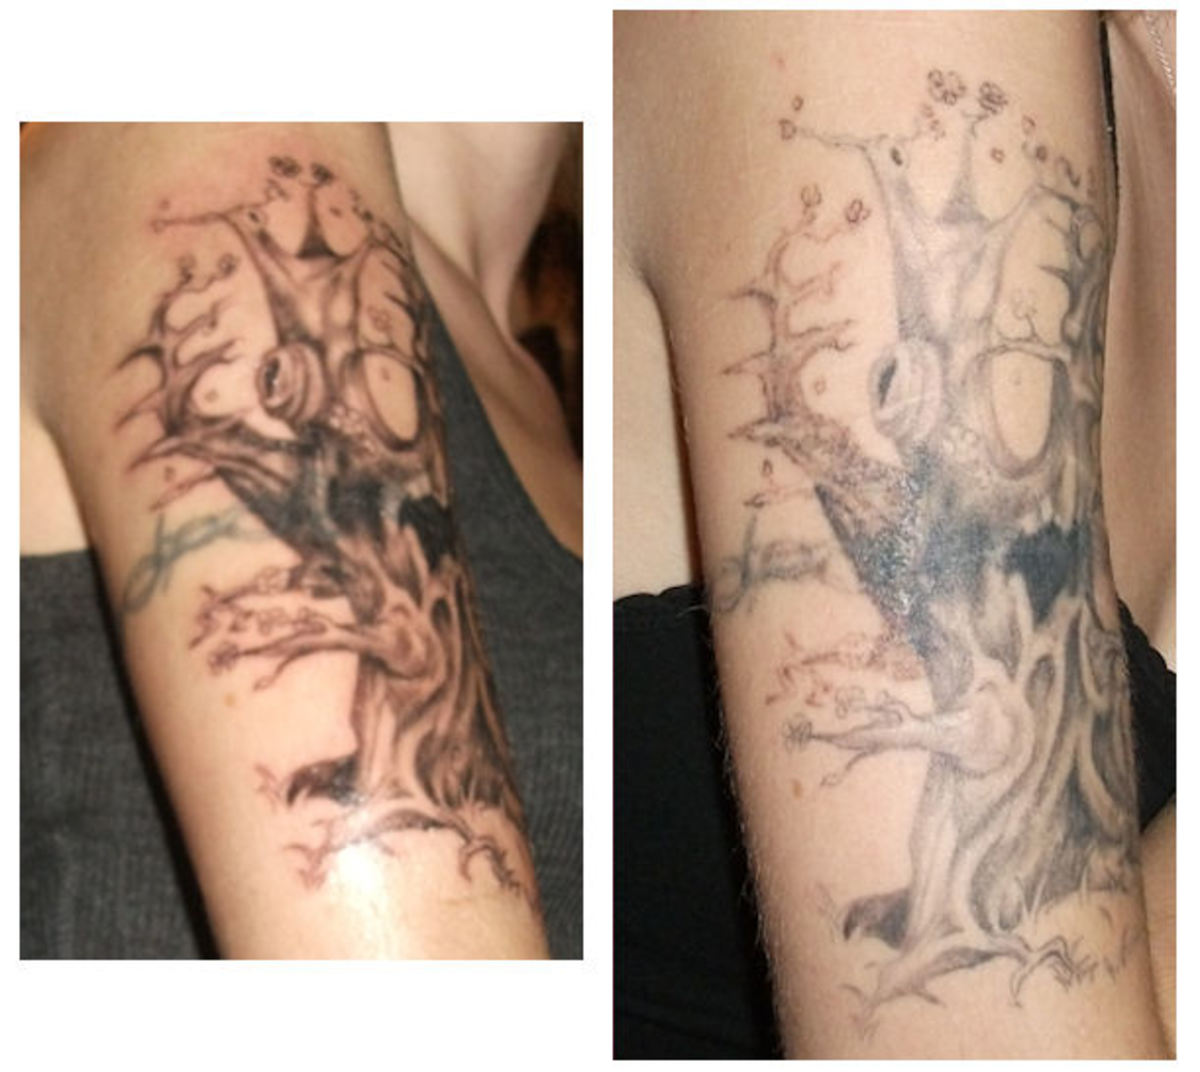 Natural Tattoo Removal